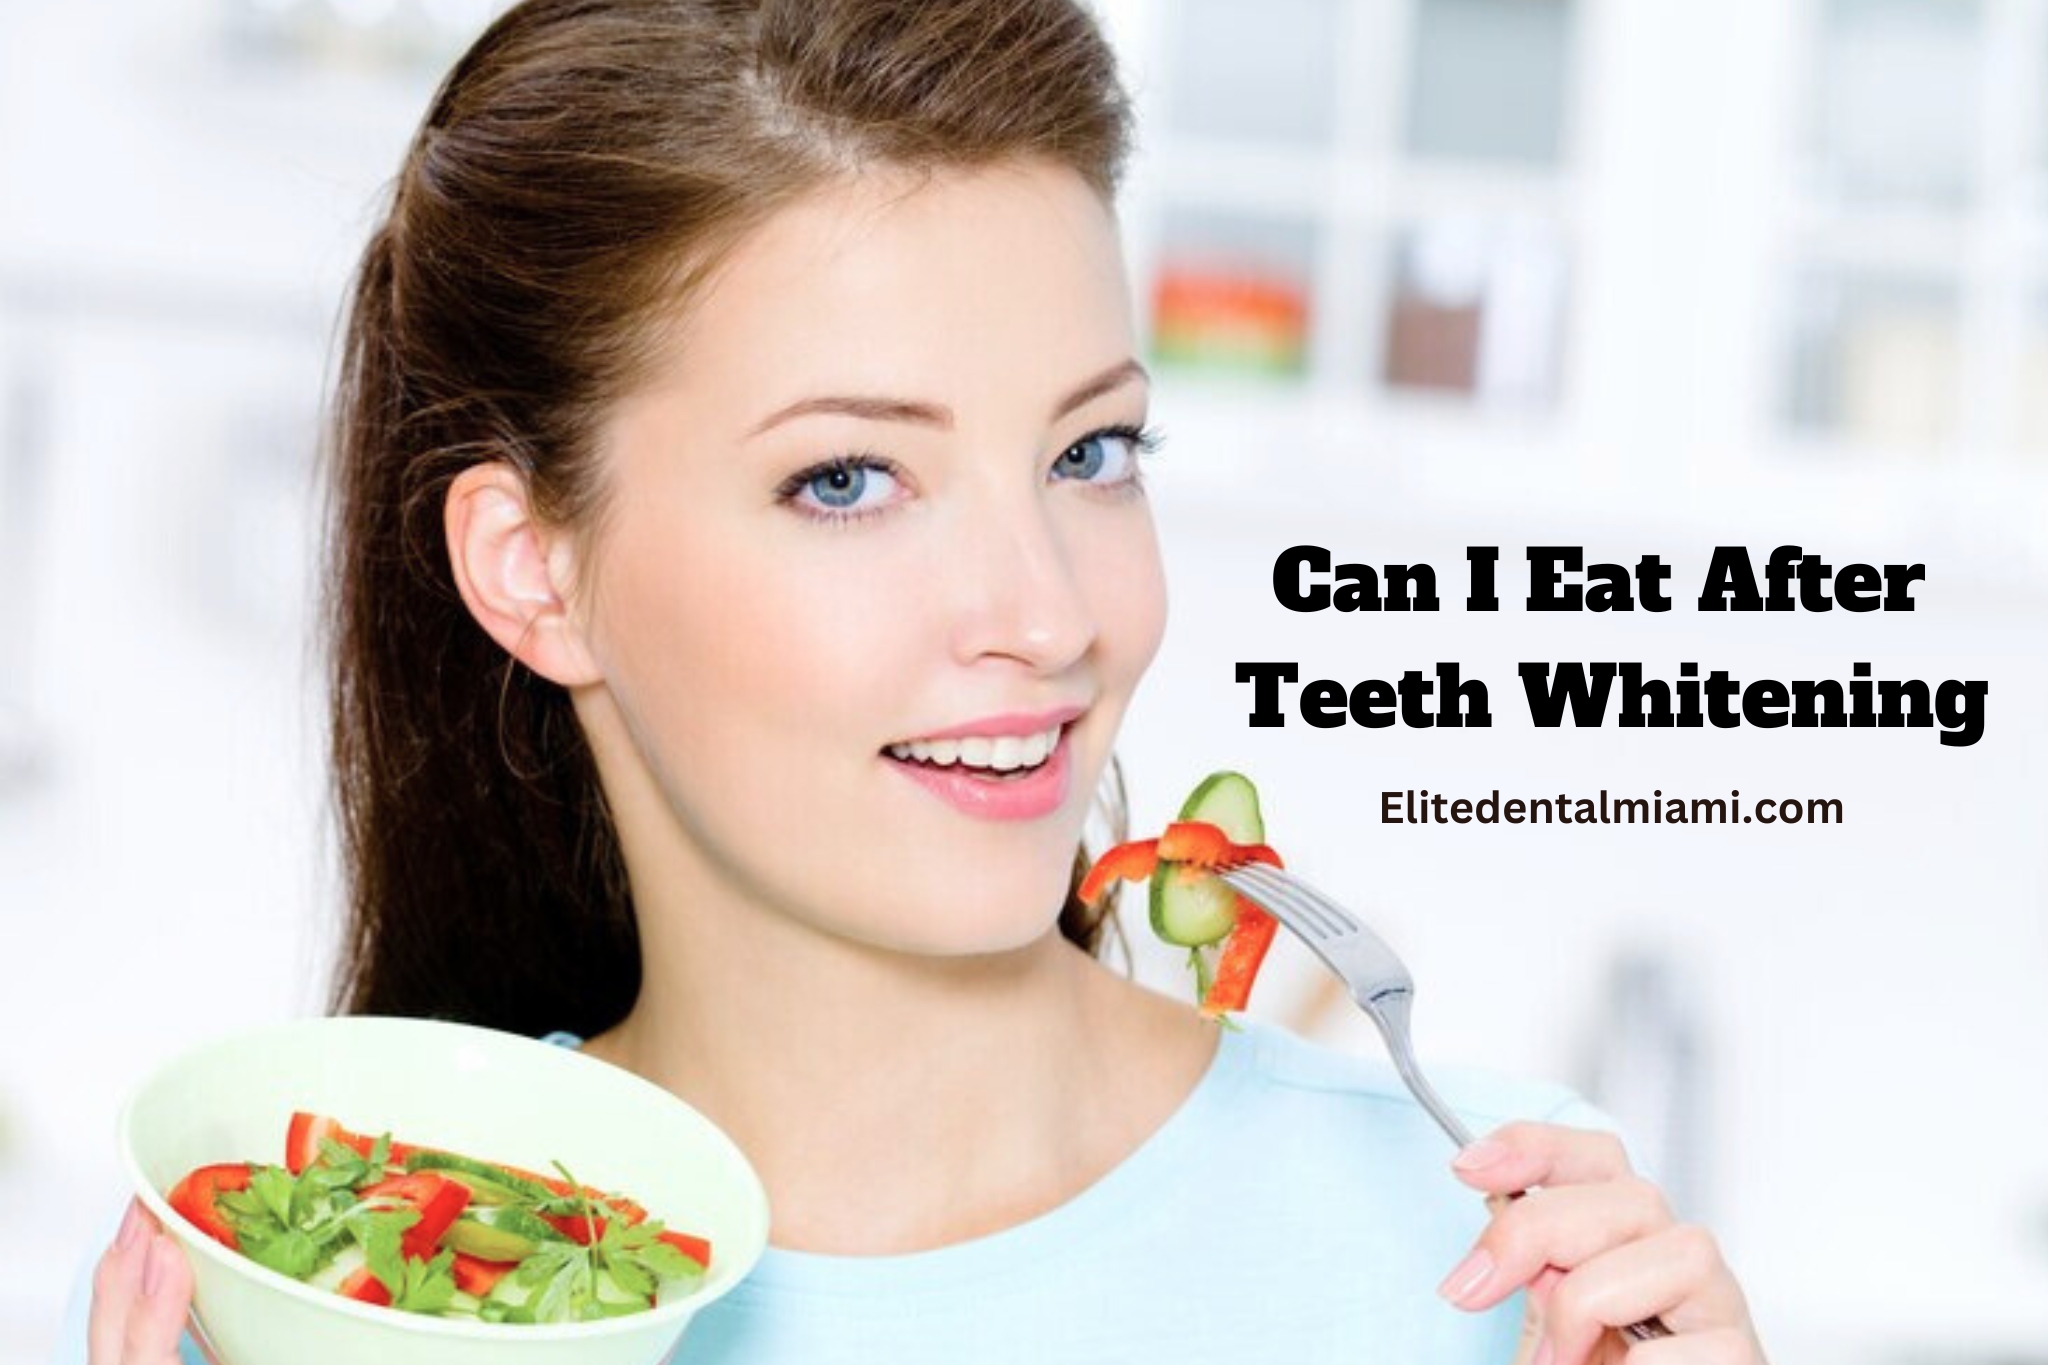 Can I Eat After Teeth Whitening